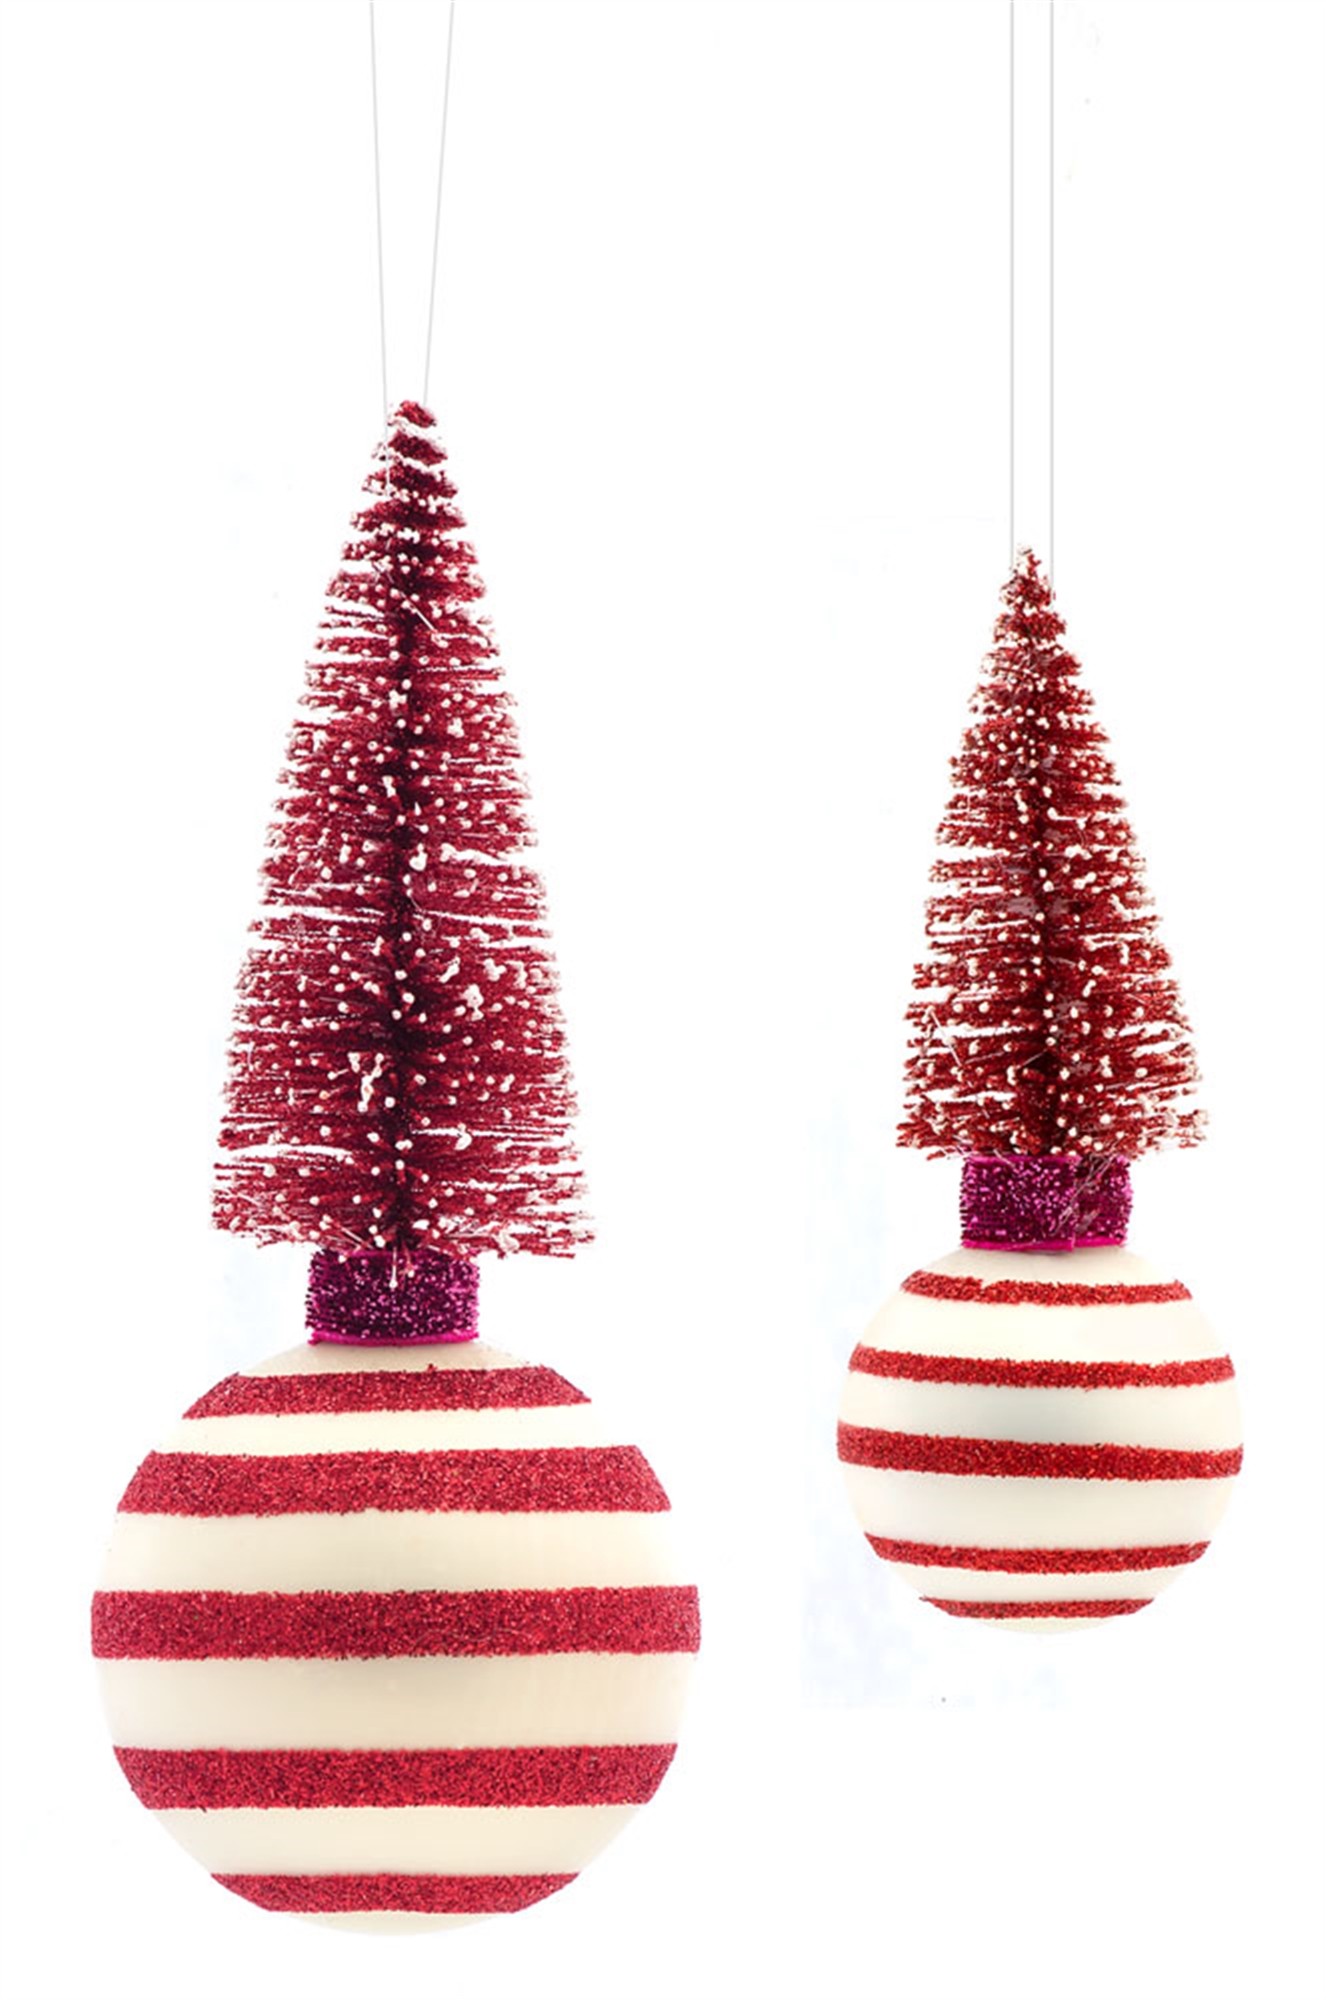 Tree and Ball Ornament (Set of 8) 4.25"H, 6"H Glass/ Plastic